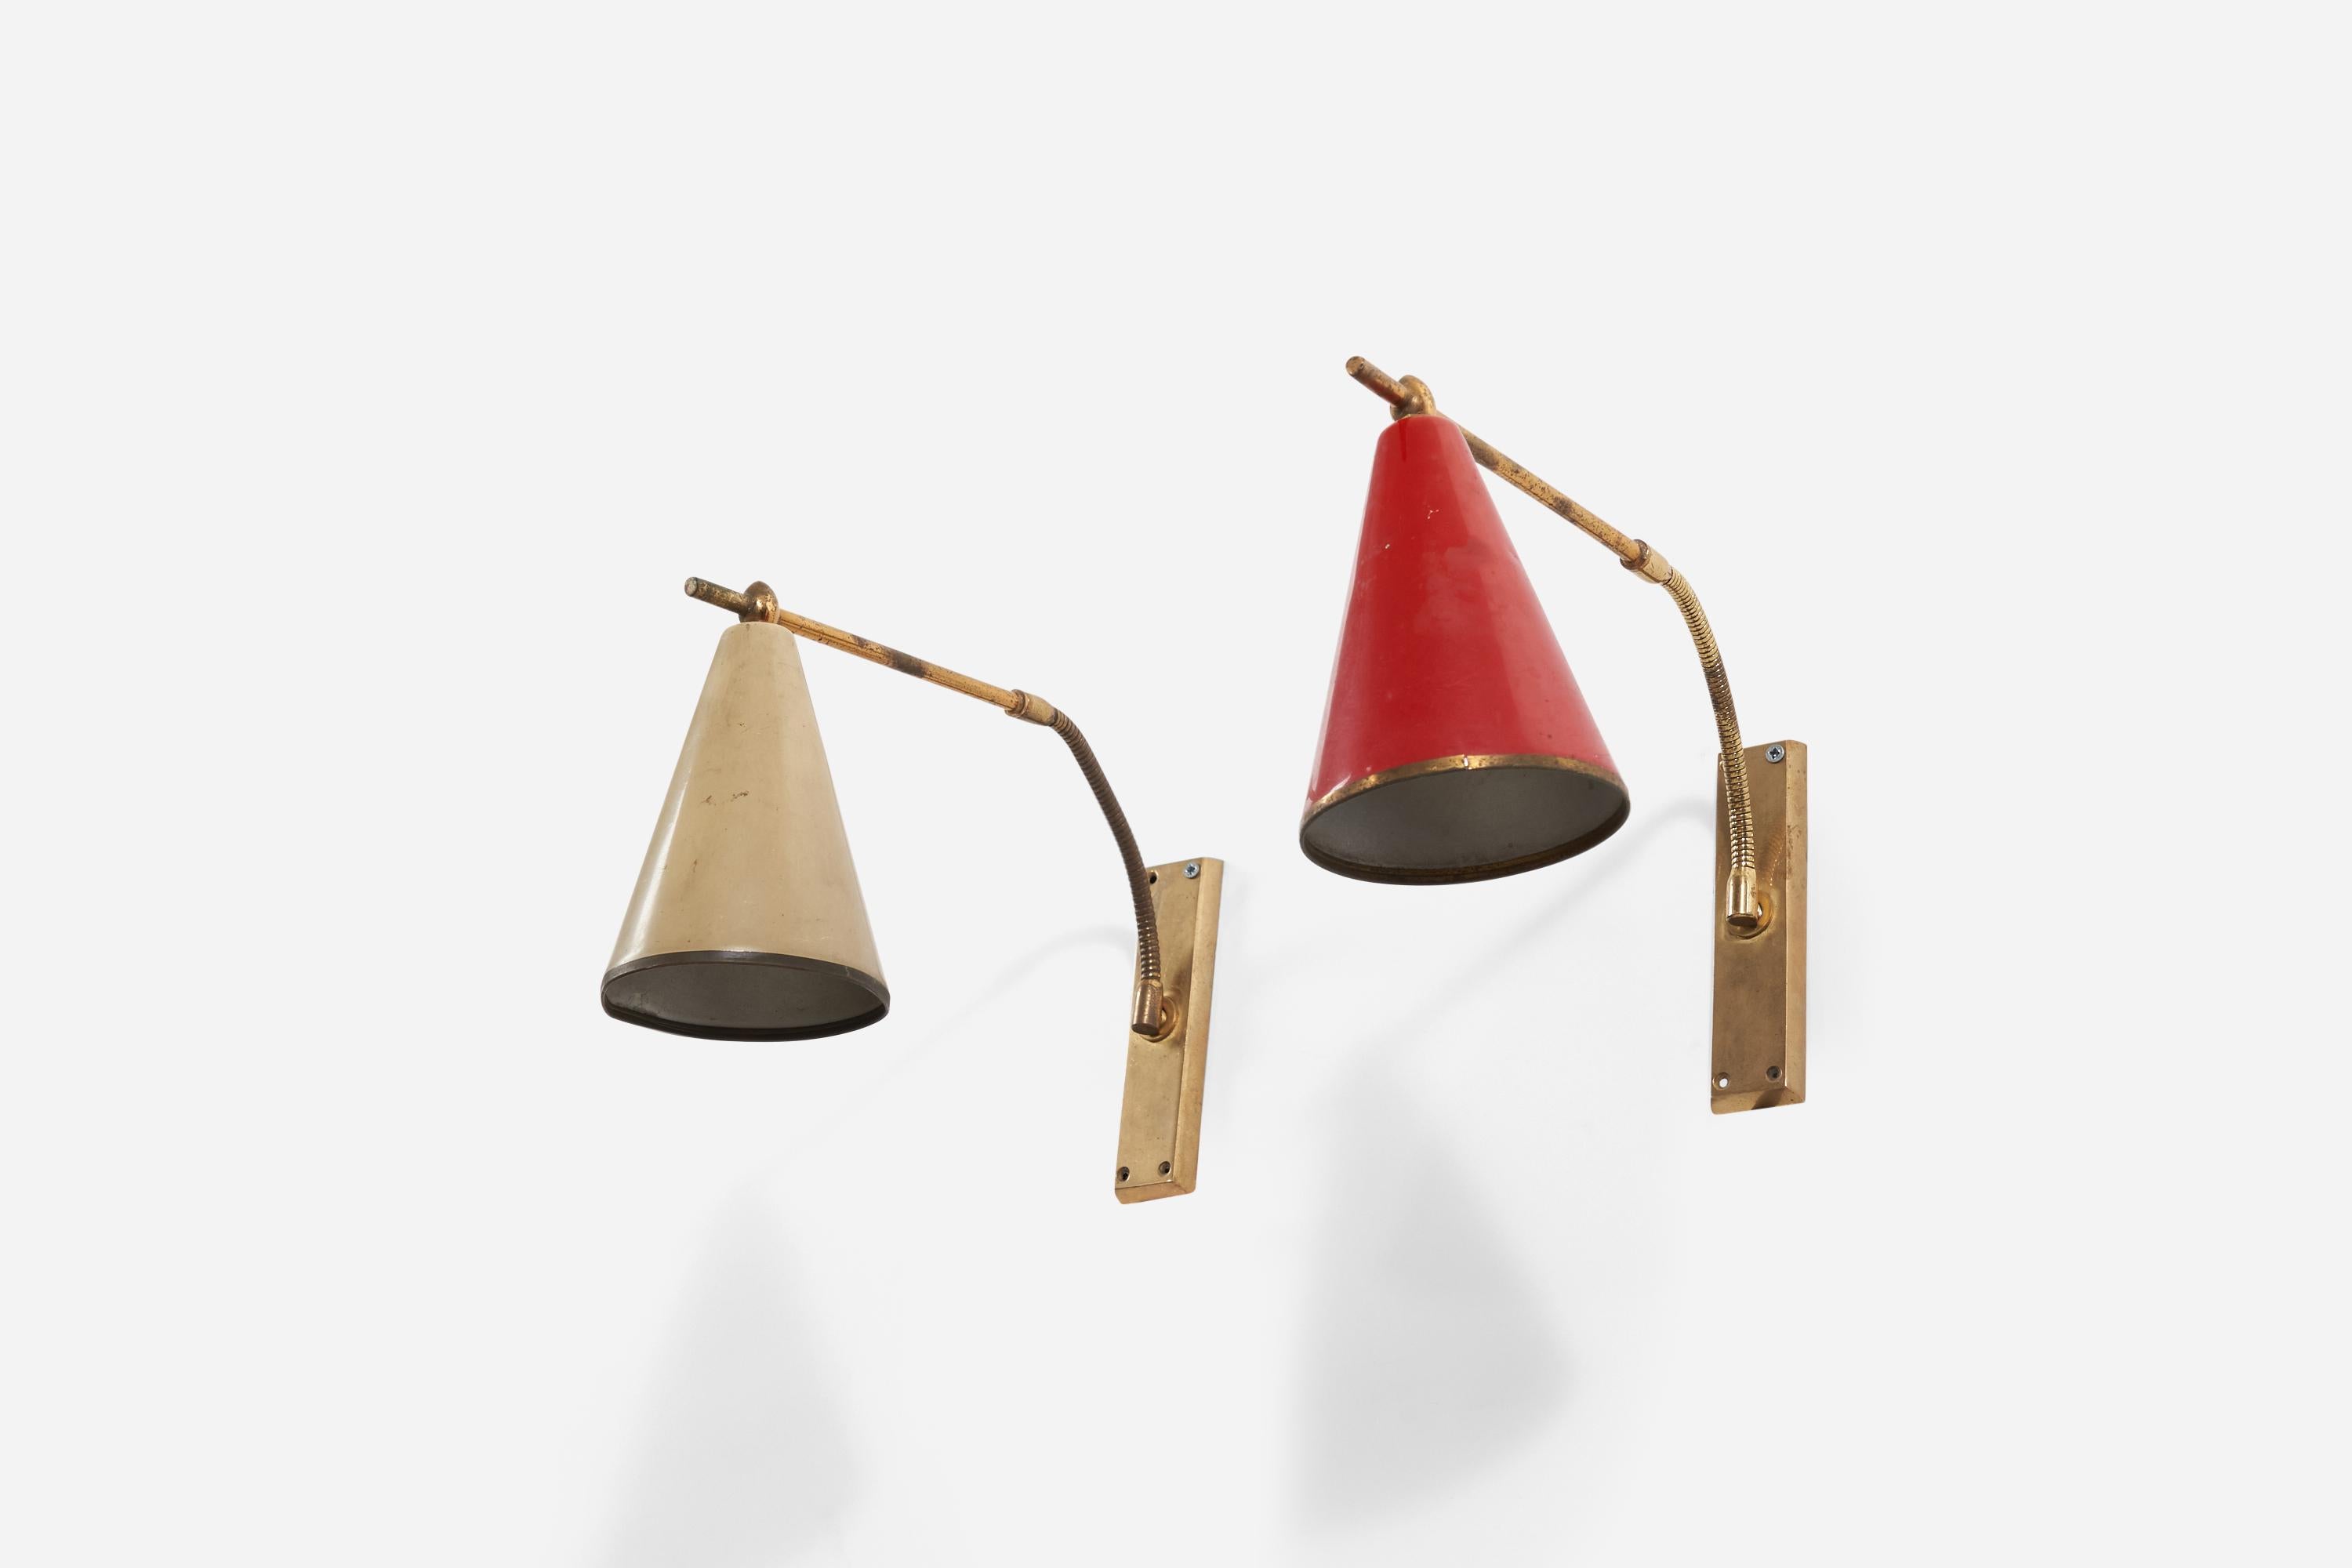 A pair of adjustable brass wall lights with beige and red lacquered shades, designed and produced in Italy, 1950s.